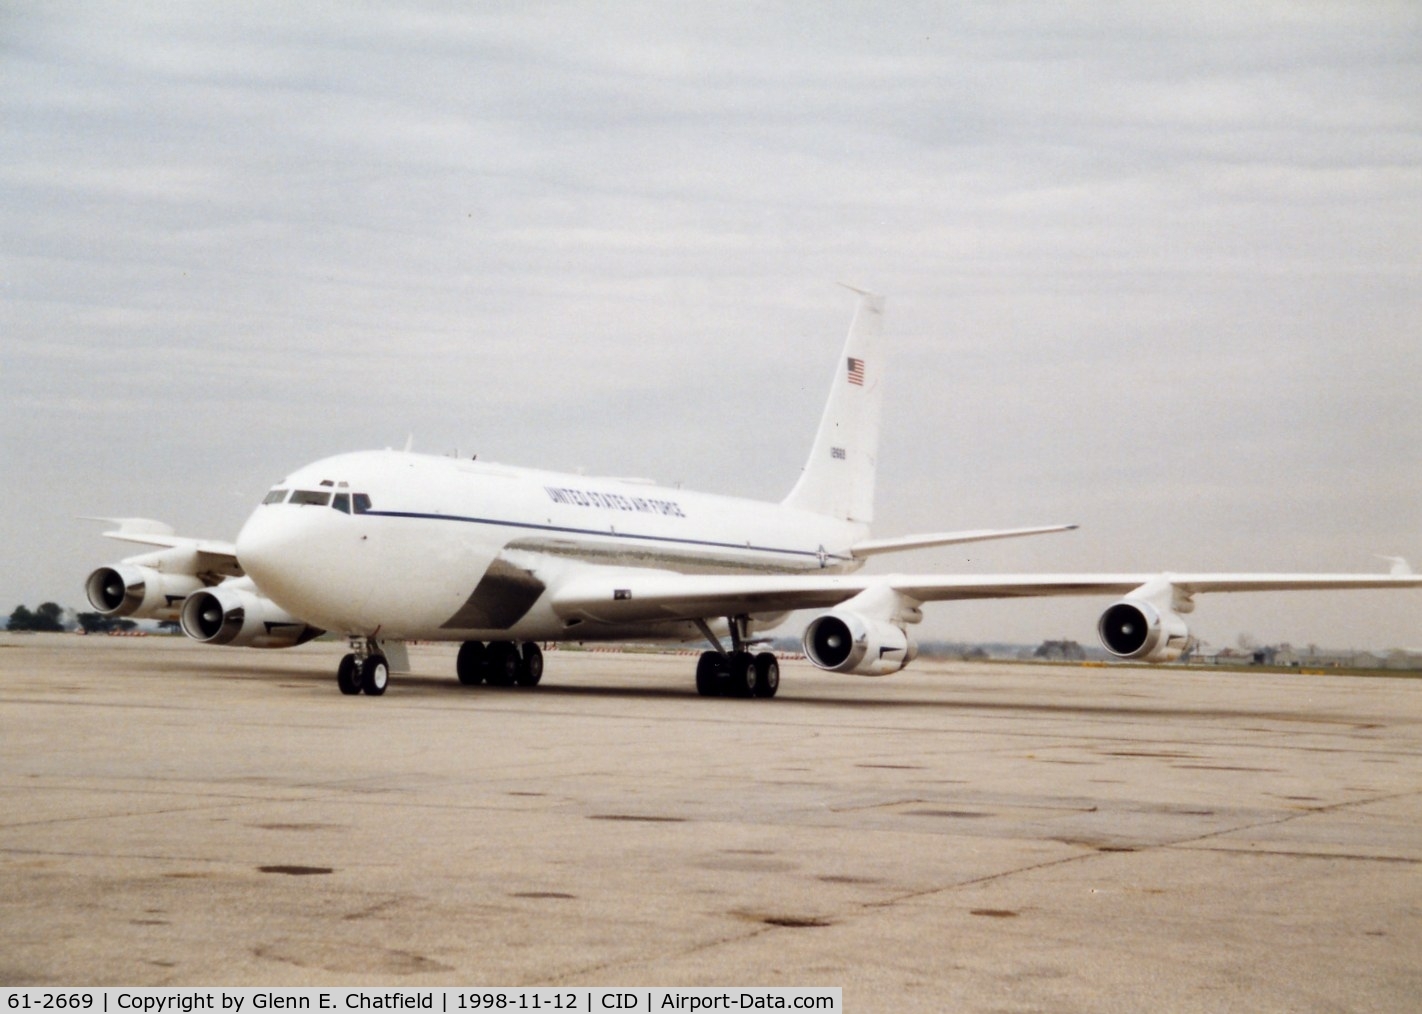 61-2669, 1961 Boeing C-135C-BN Stratolifter C/N 18345, Speckled Trout at the base of the control tower